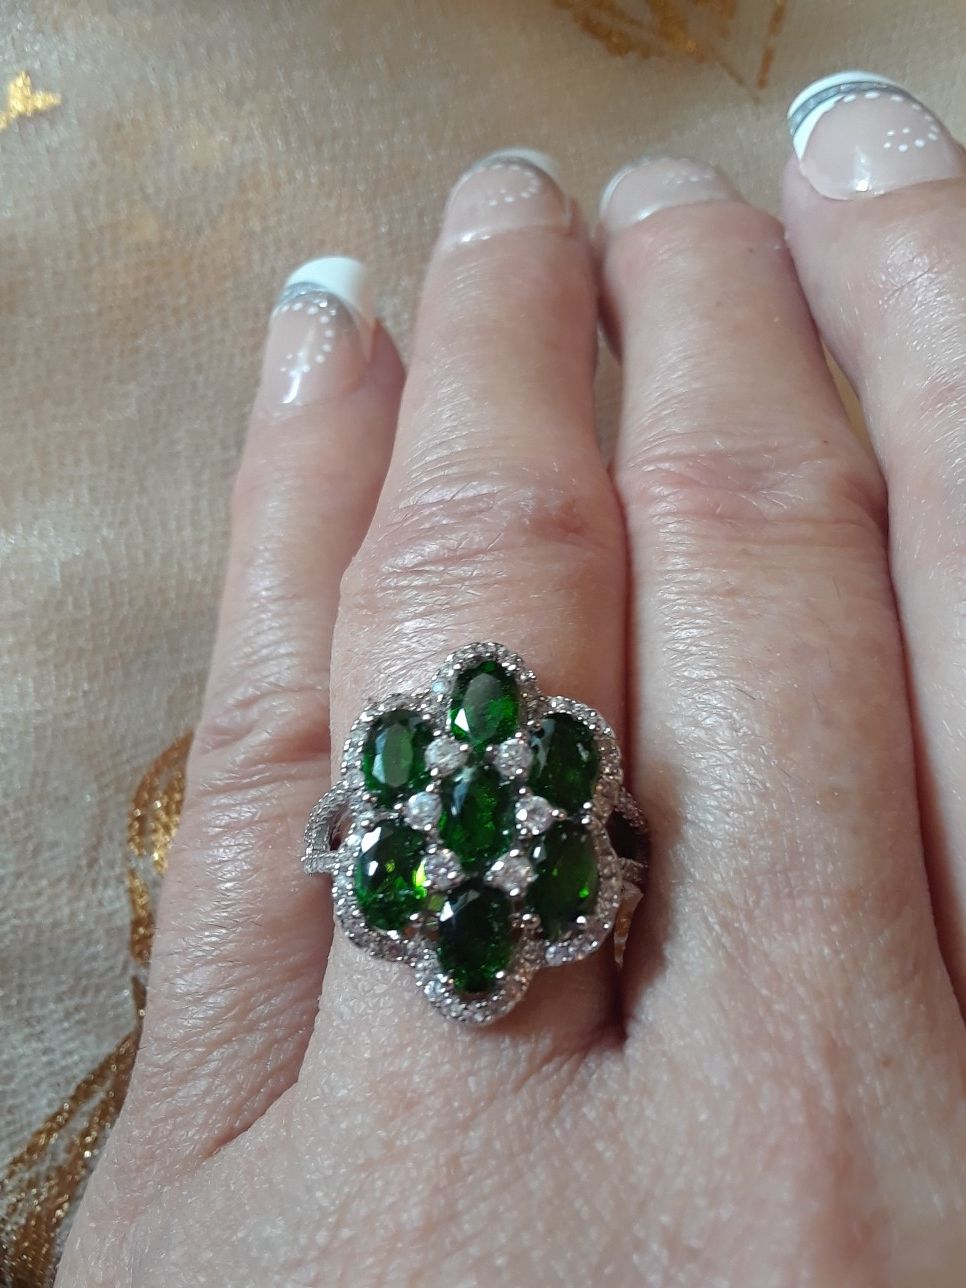 NEW! Genuine Russian Chrome Diopside SS925